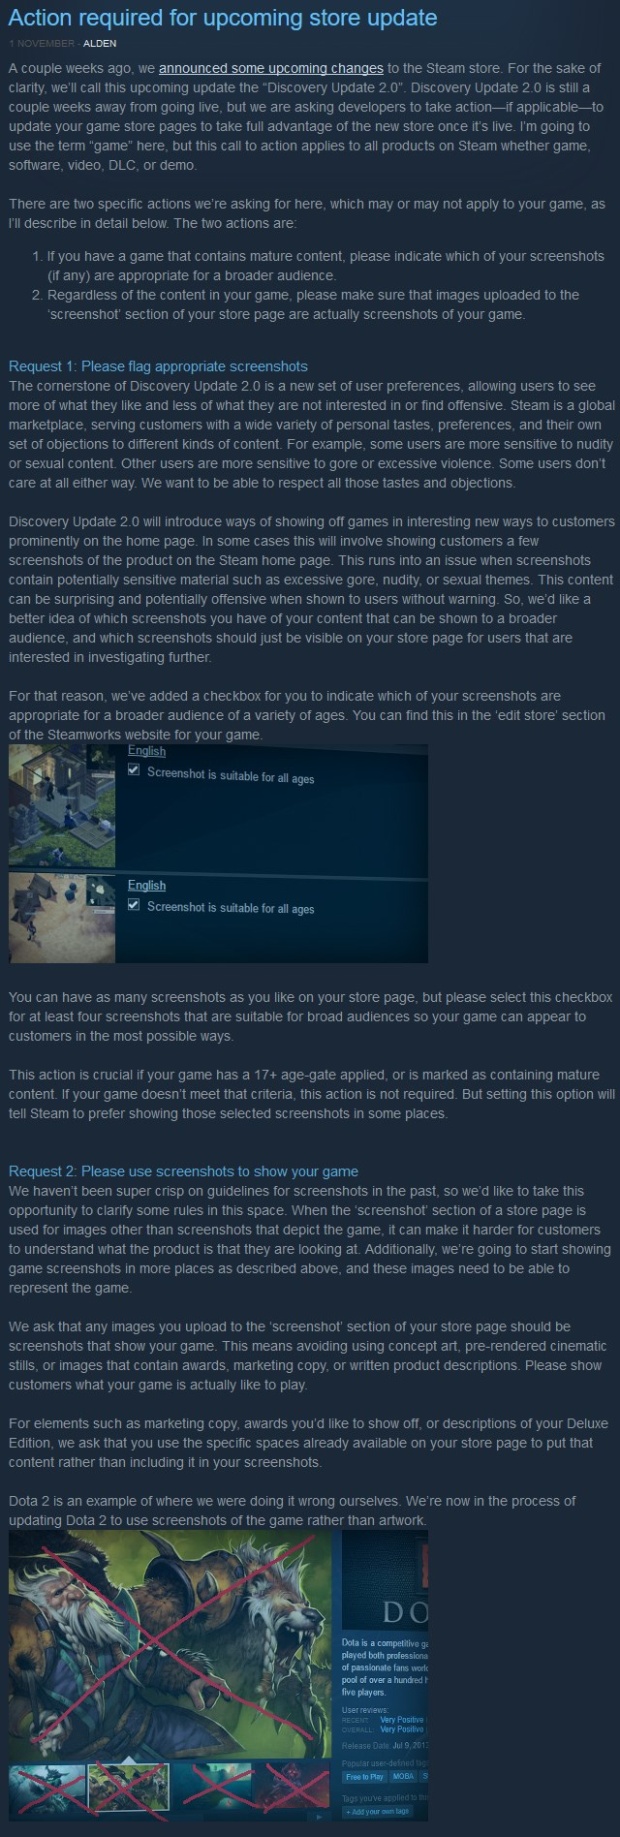 Valve's comments and reasoning behind the upcoming Steam Store screenshots update